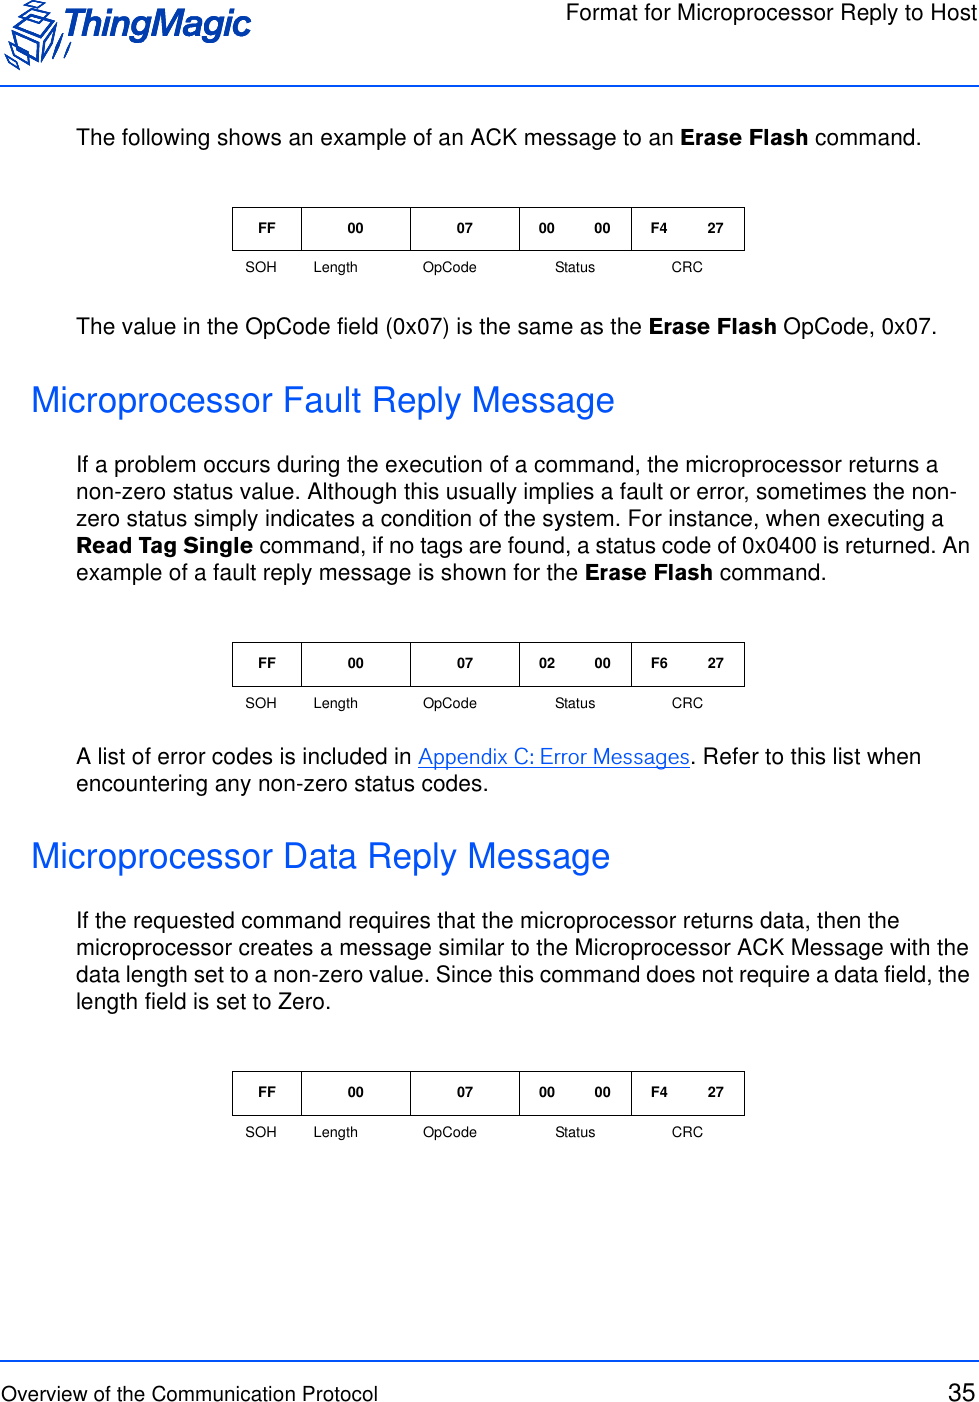 Format for Microprocessor Reply to HostOverview of the Communication Protocol 35The following shows an example of an ACK message to an Erase Flash command.The value in the OpCode field (0x07) is the same as the Erase Flash OpCode, 0x07.Microprocessor Fault Reply MessageIf a problem occurs during the execution of a command, the microprocessor returns a non-zero status value. Although this usually implies a fault or error, sometimes the non-zero status simply indicates a condition of the system. For instance, when executing a Read Tag Single command, if no tags are found, a status code of 0x0400 is returned. An example of a fault reply message is shown for the Erase Flash command.A list of error codes is included in Appendix C: Error Messages. Refer to this list when encountering any non-zero status codes.Microprocessor Data Reply MessageIf the requested command requires that the microprocessor returns data, then the microprocessor creates a message similar to the Microprocessor ACK Message with the data length set to a non-zero value. Since this command does not require a data field, the length field is set to Zero.FF 00 07 00 00 F4 27SOH Length OpCode Status CRCFF 00 07 02 00 F6 27SOH Length OpCode Status CRCFF 00 07 00 00 F4 27SOH Length OpCode Status CRC